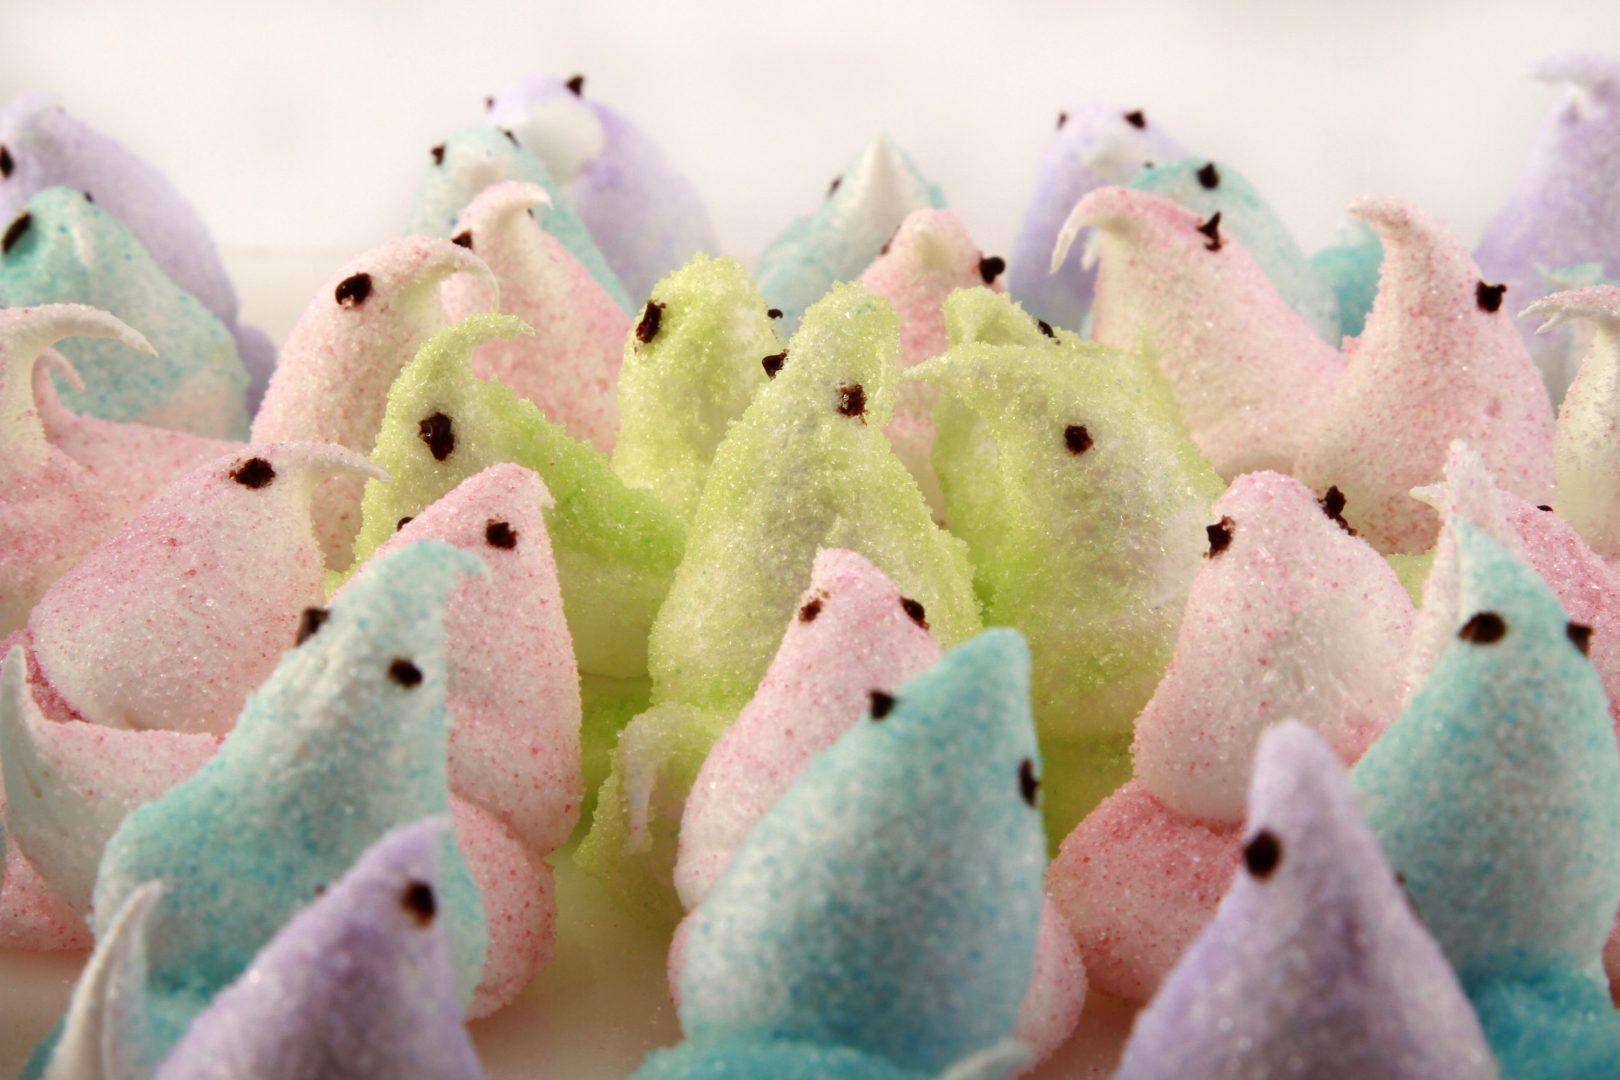 Peeps are marshmallow candies that are shaped into chicks, bunnies, and other animals. (Kirk McKoy/Los Angeles Times/TNS)